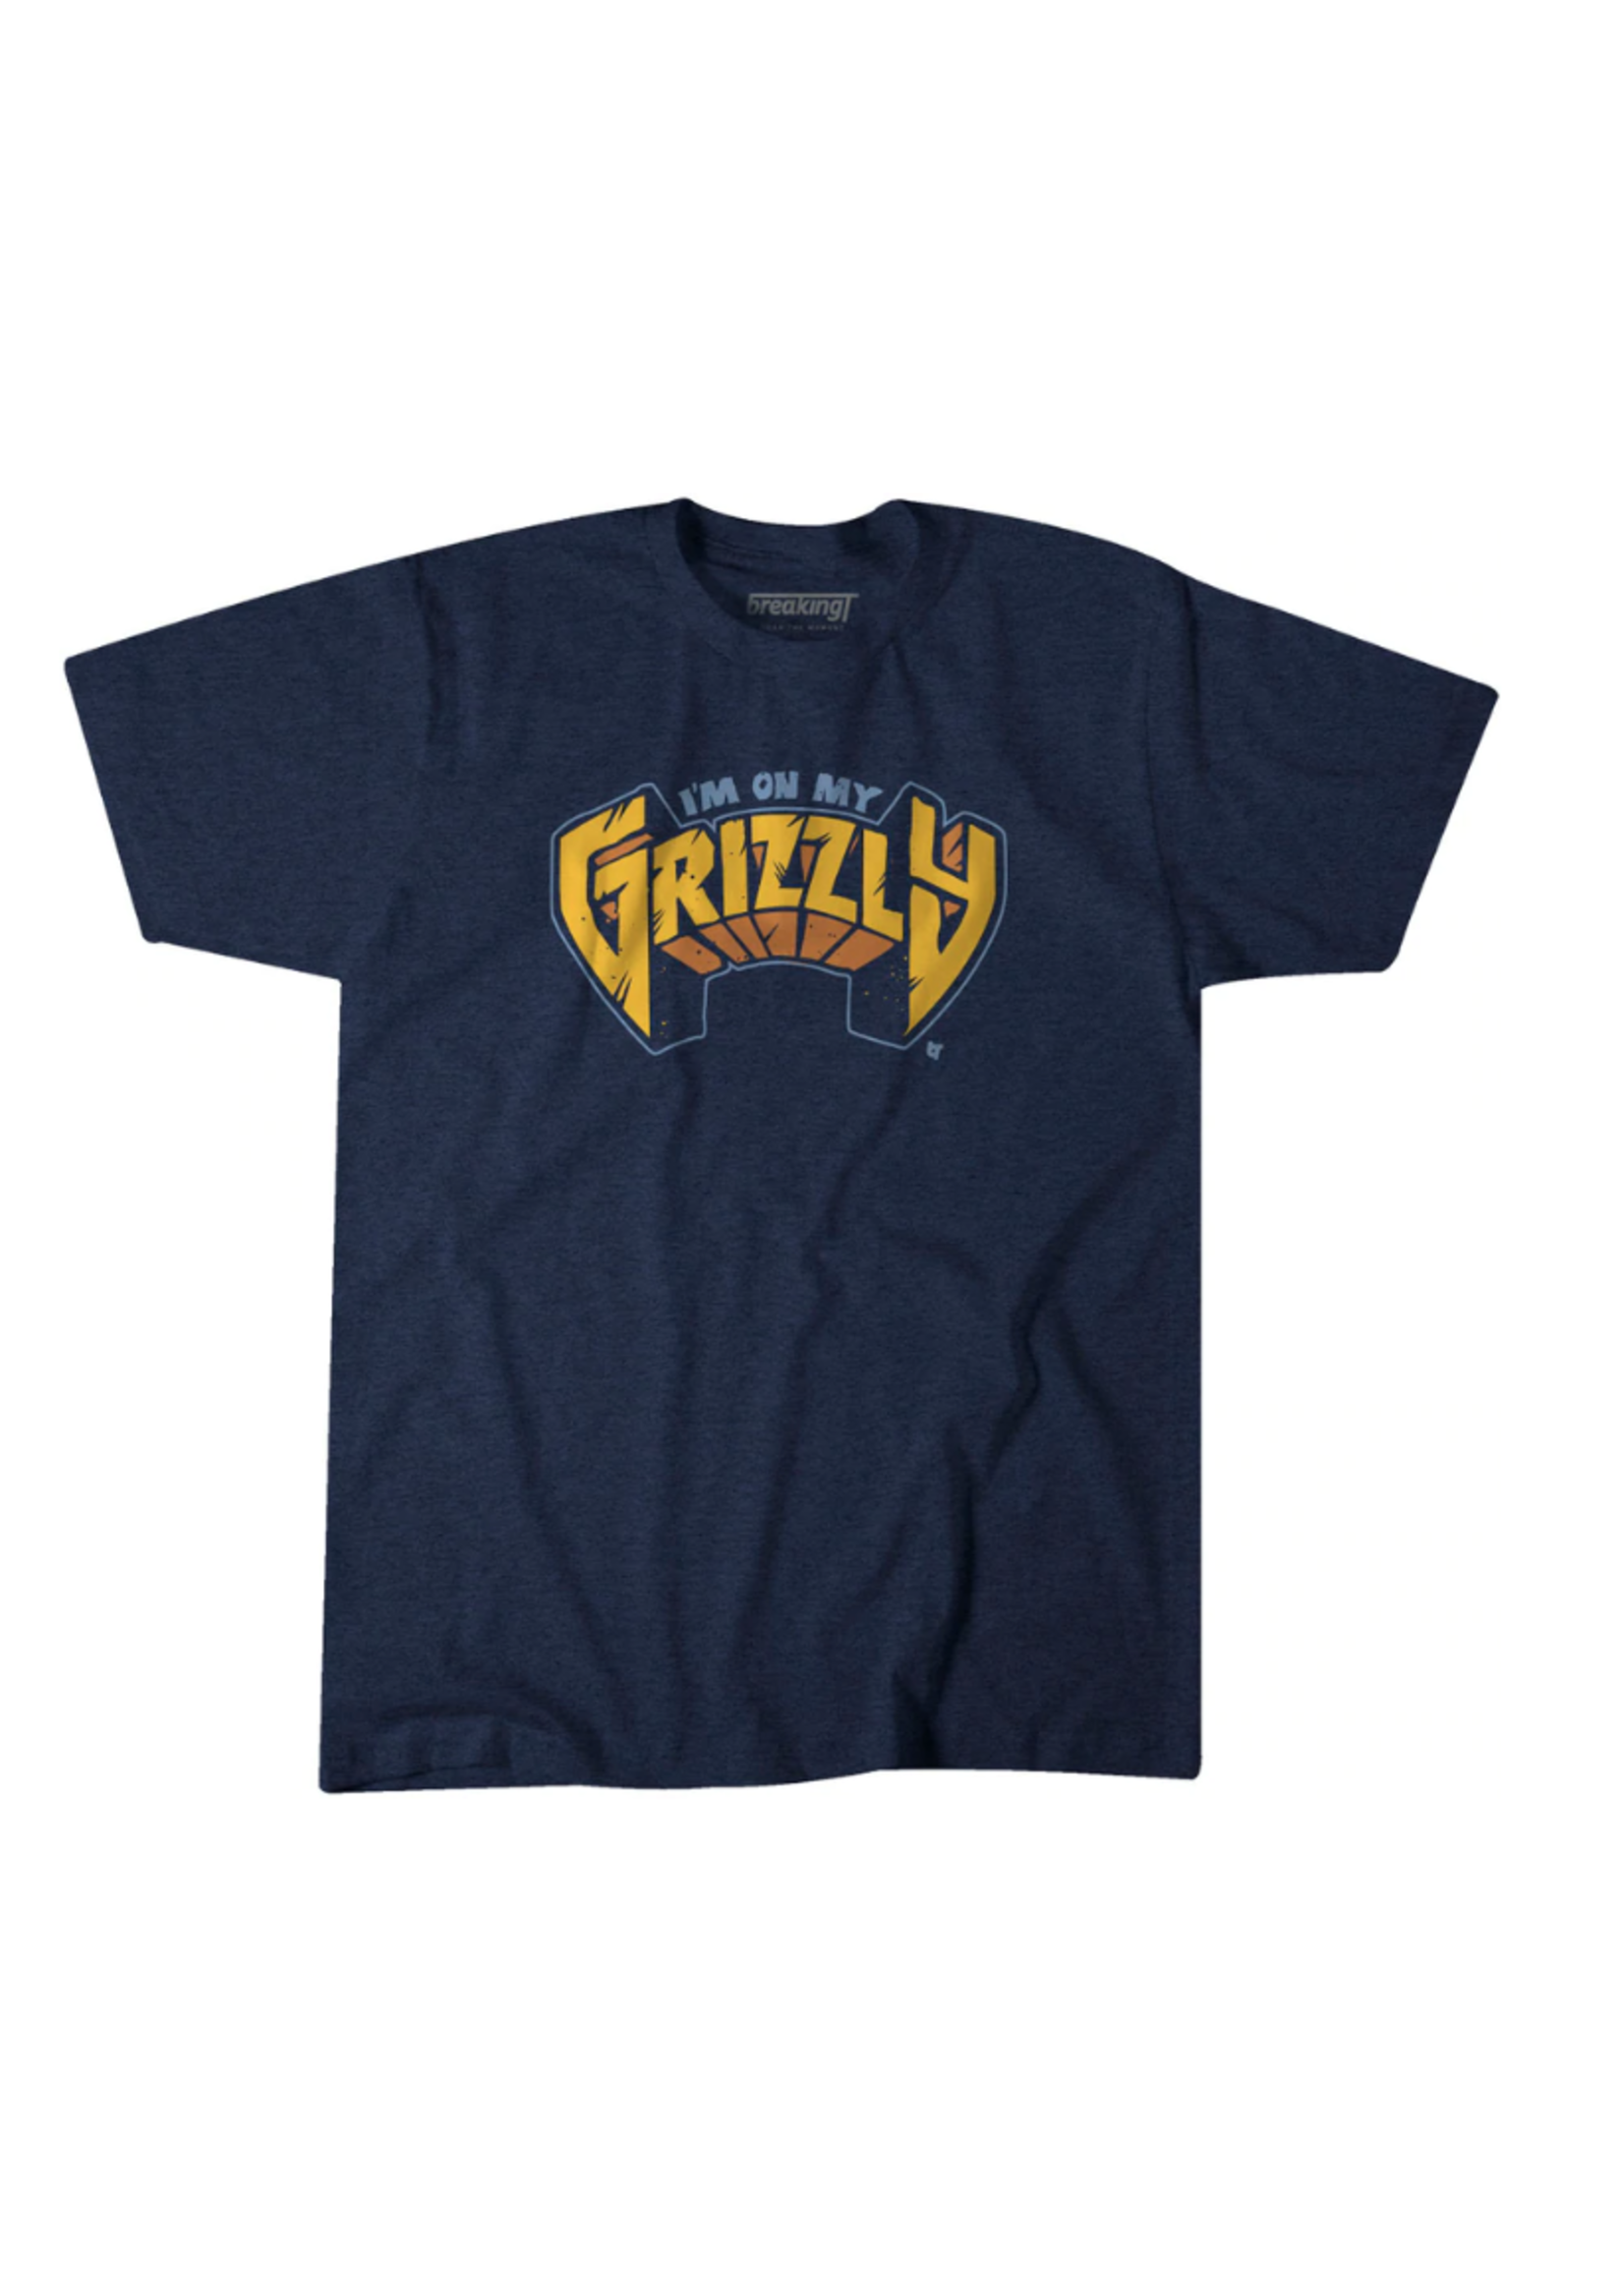 Breaking T I'm on My Grizzly Tee